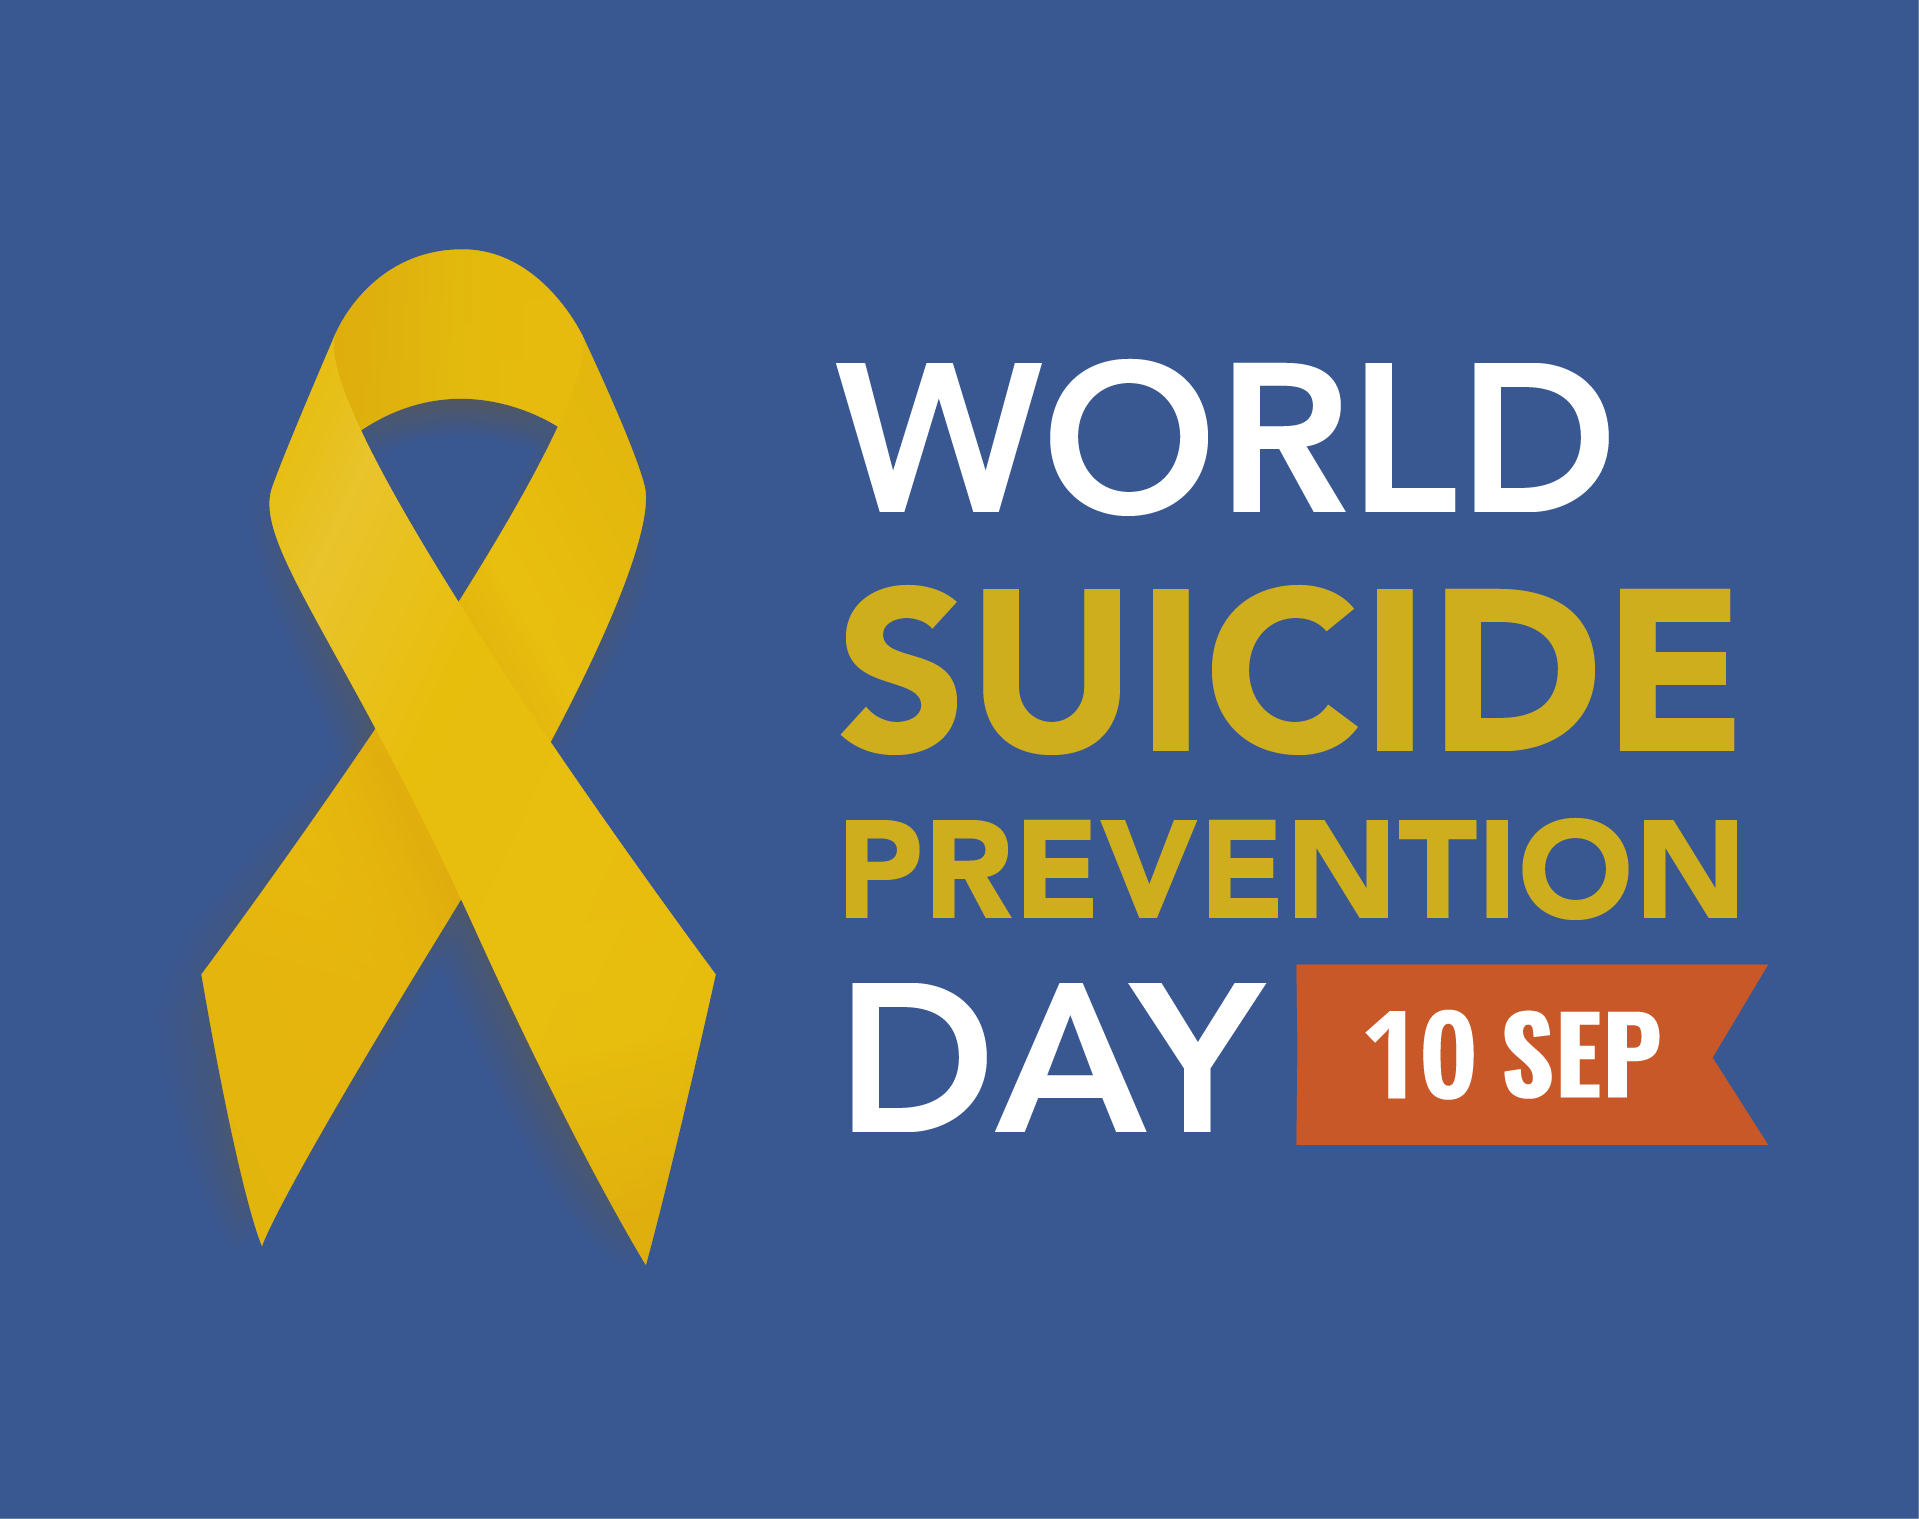 Suicide Prevention Day, 10 September 2021 Image